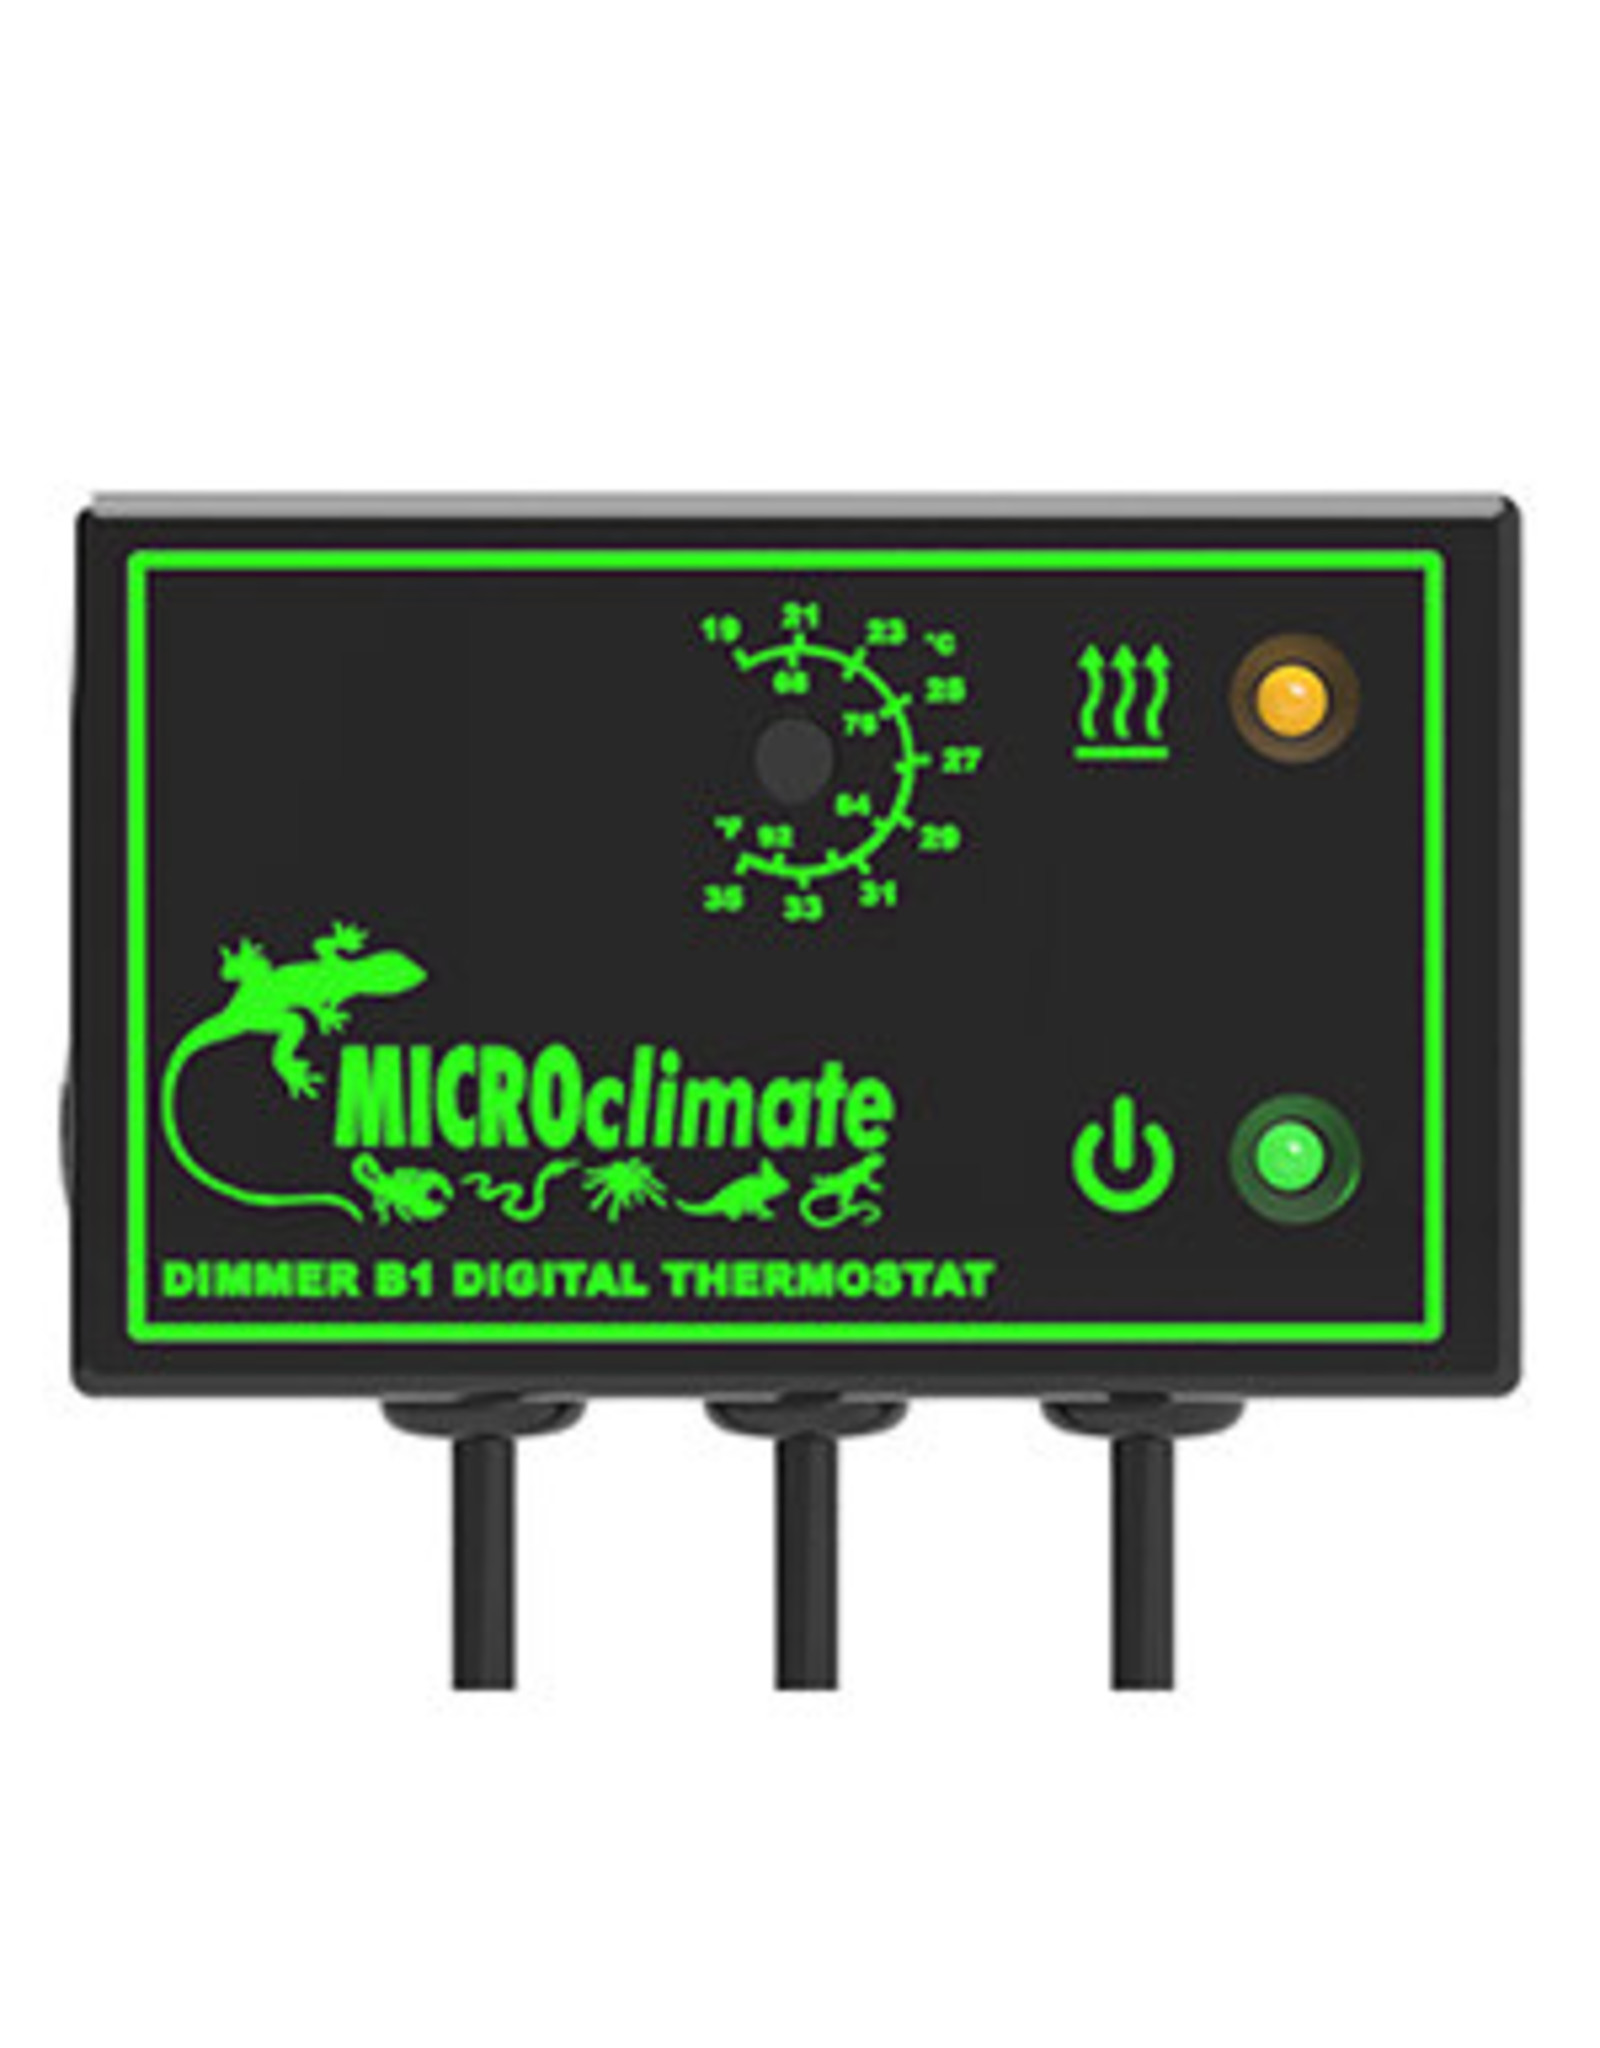 Microclimate Microclimate Dimmer Thermostat Black 600w